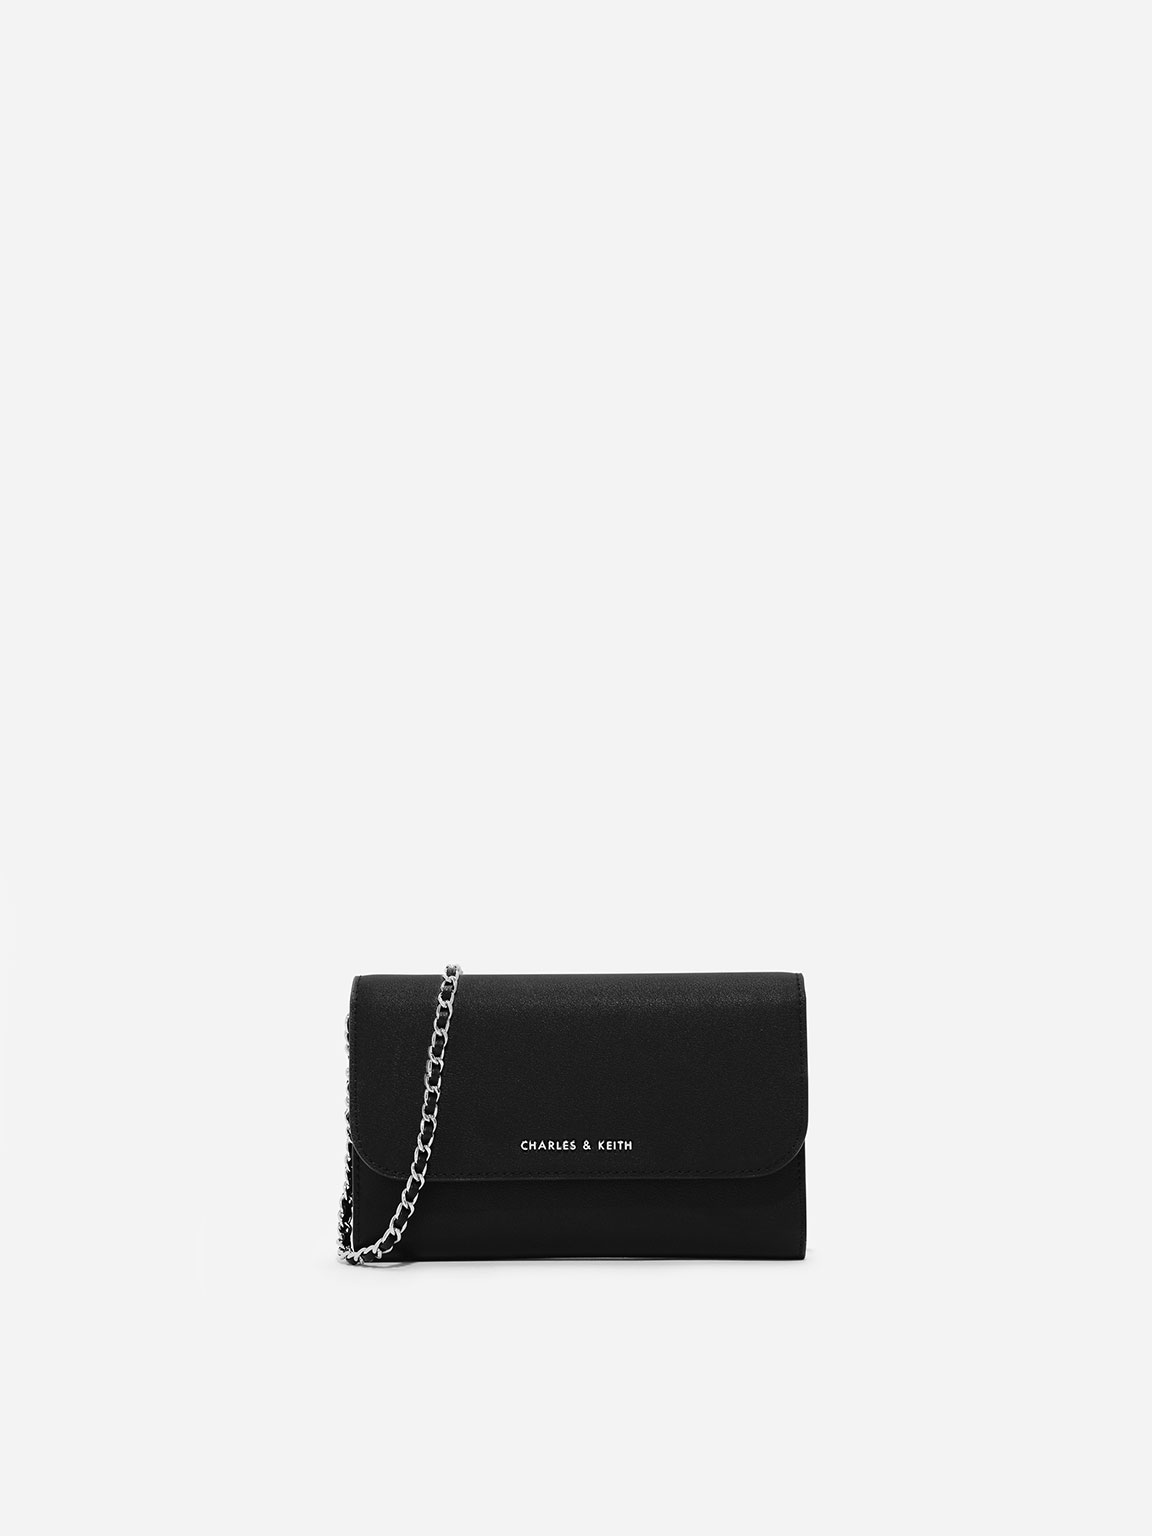 charles and keith wallet singapore